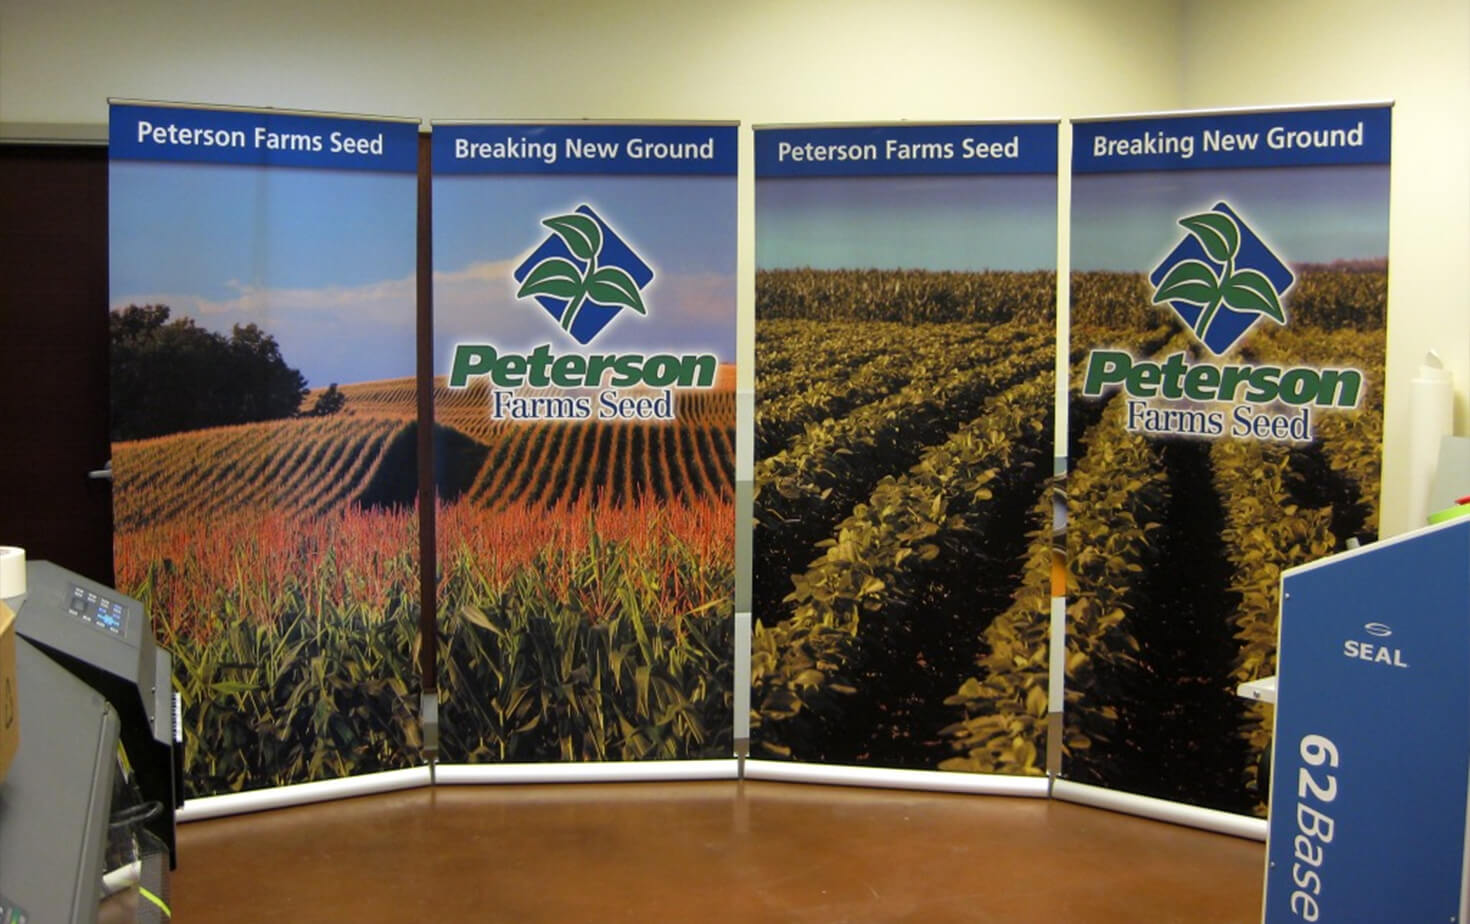 Peterson Farms Seed tradeshow banner stands